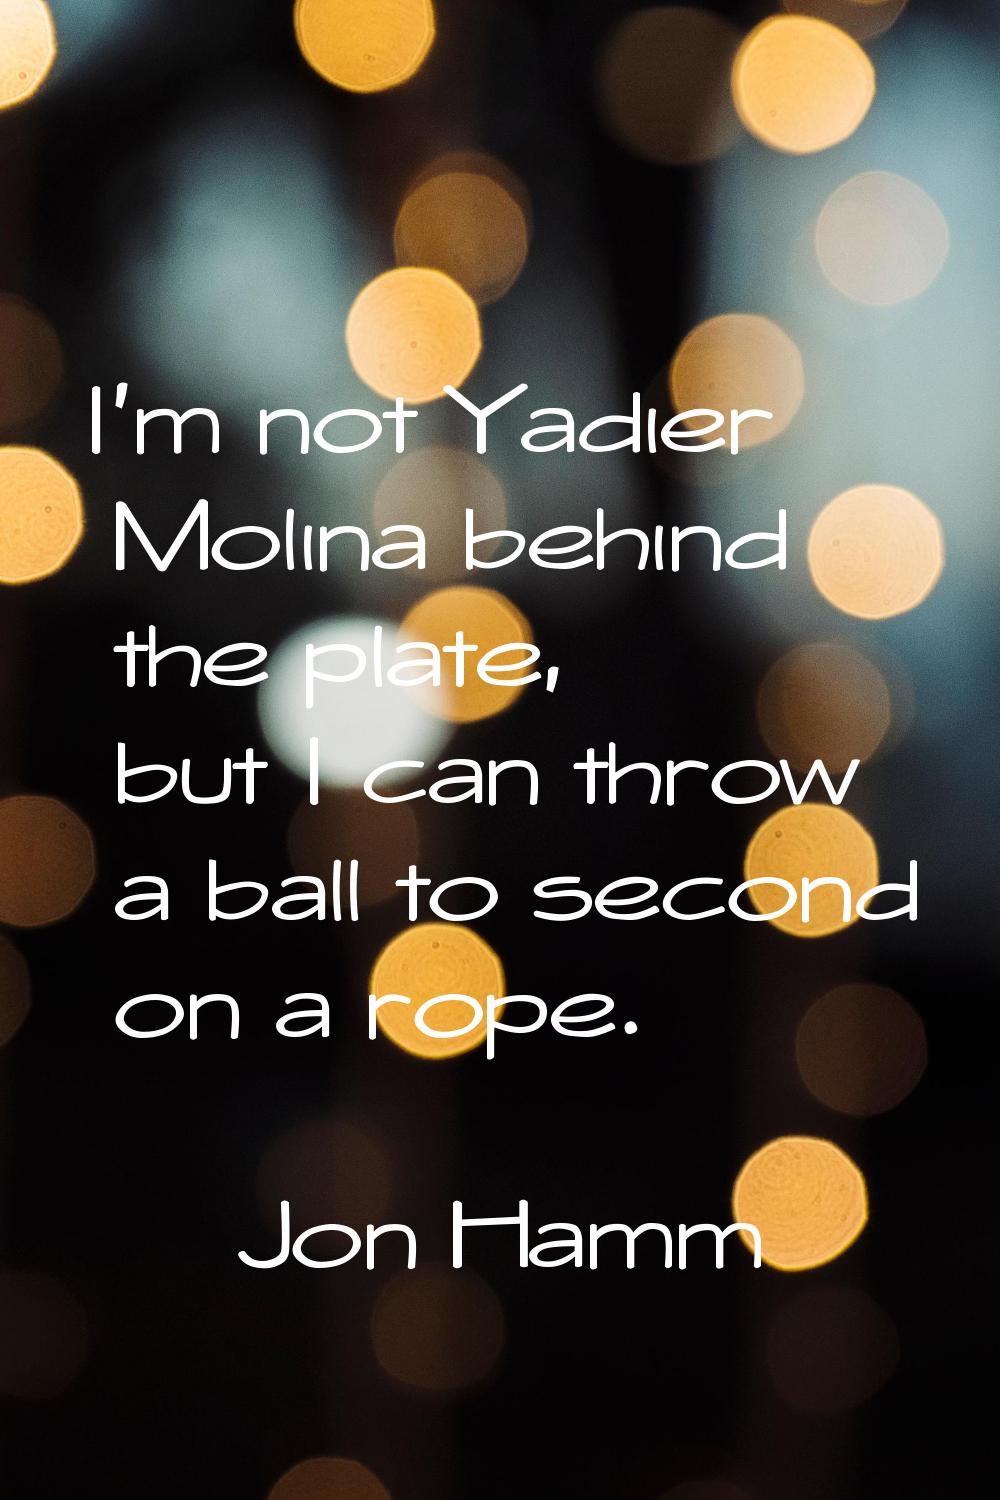 I'm not Yadier Molina behind the plate, but I can throw a ball to second on a rope.